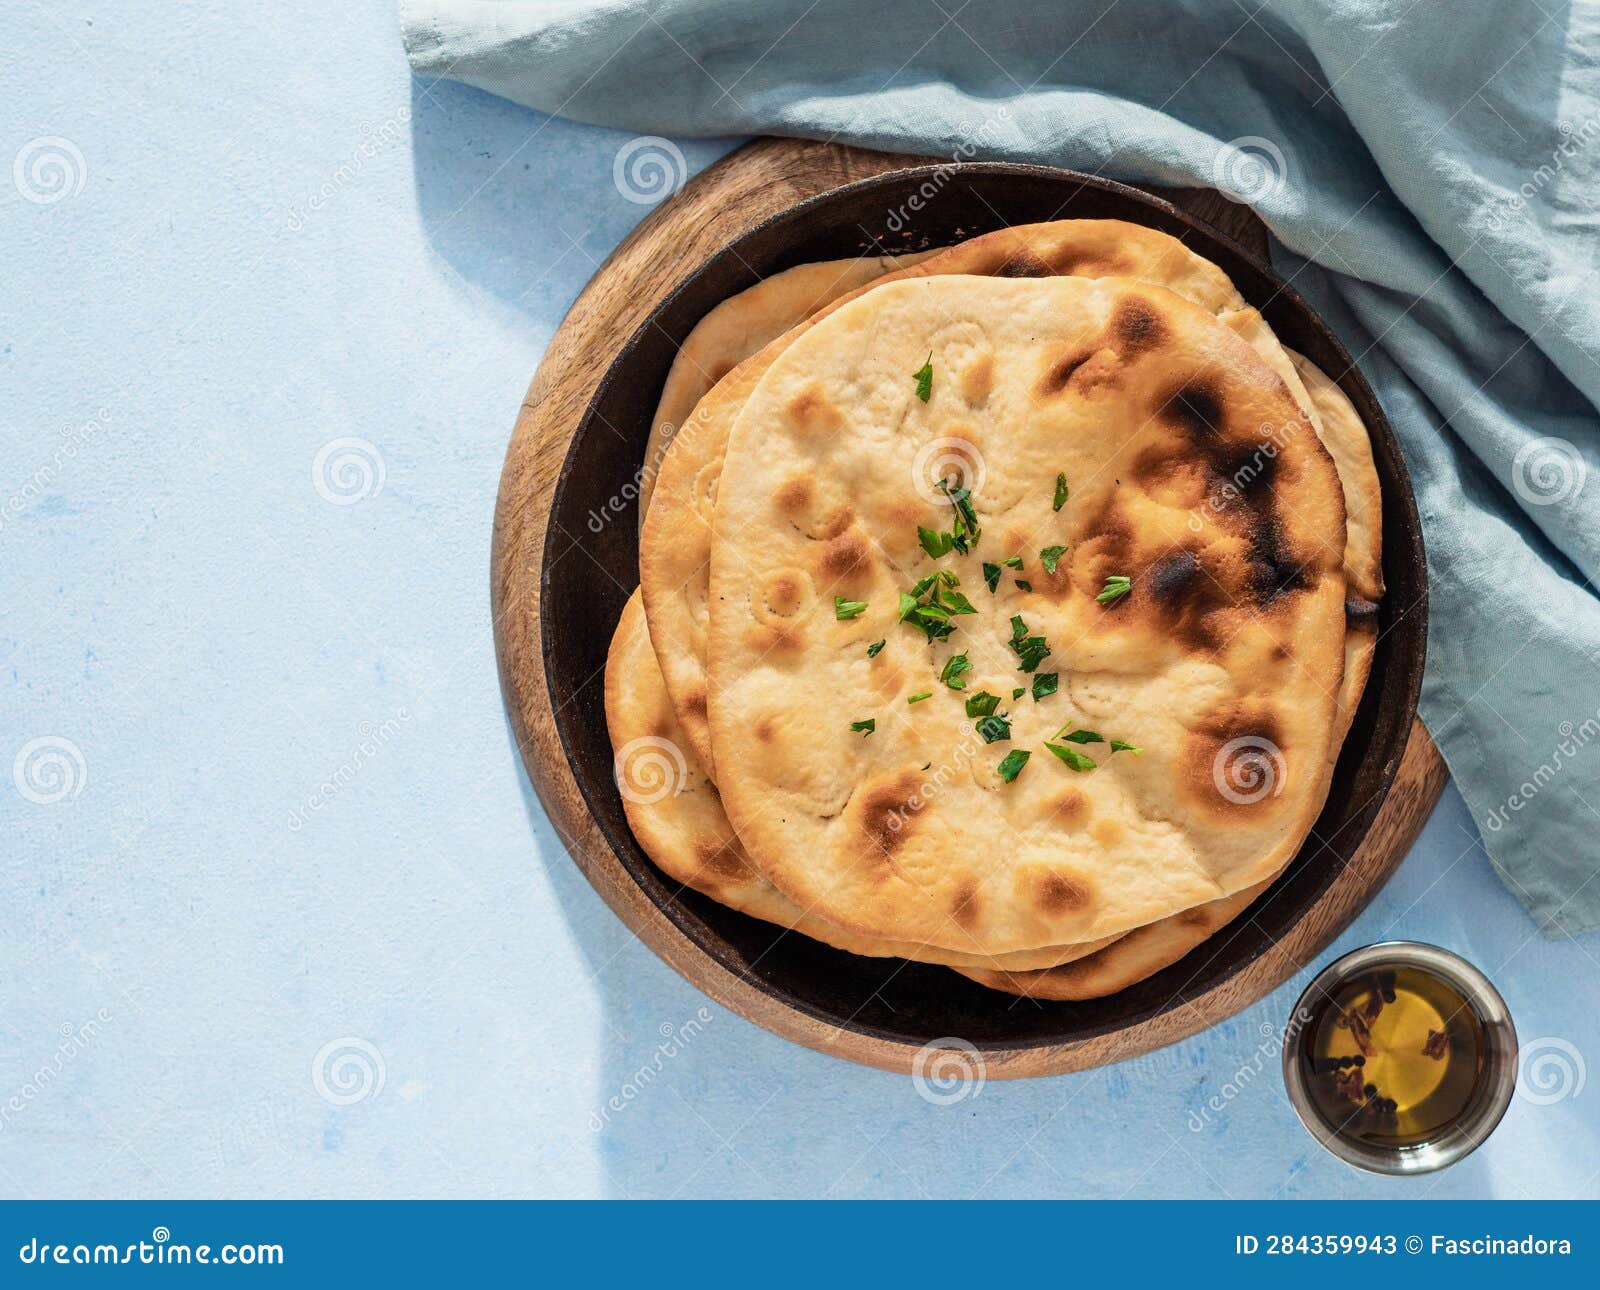 naan flatbread on blue, copy space, top view